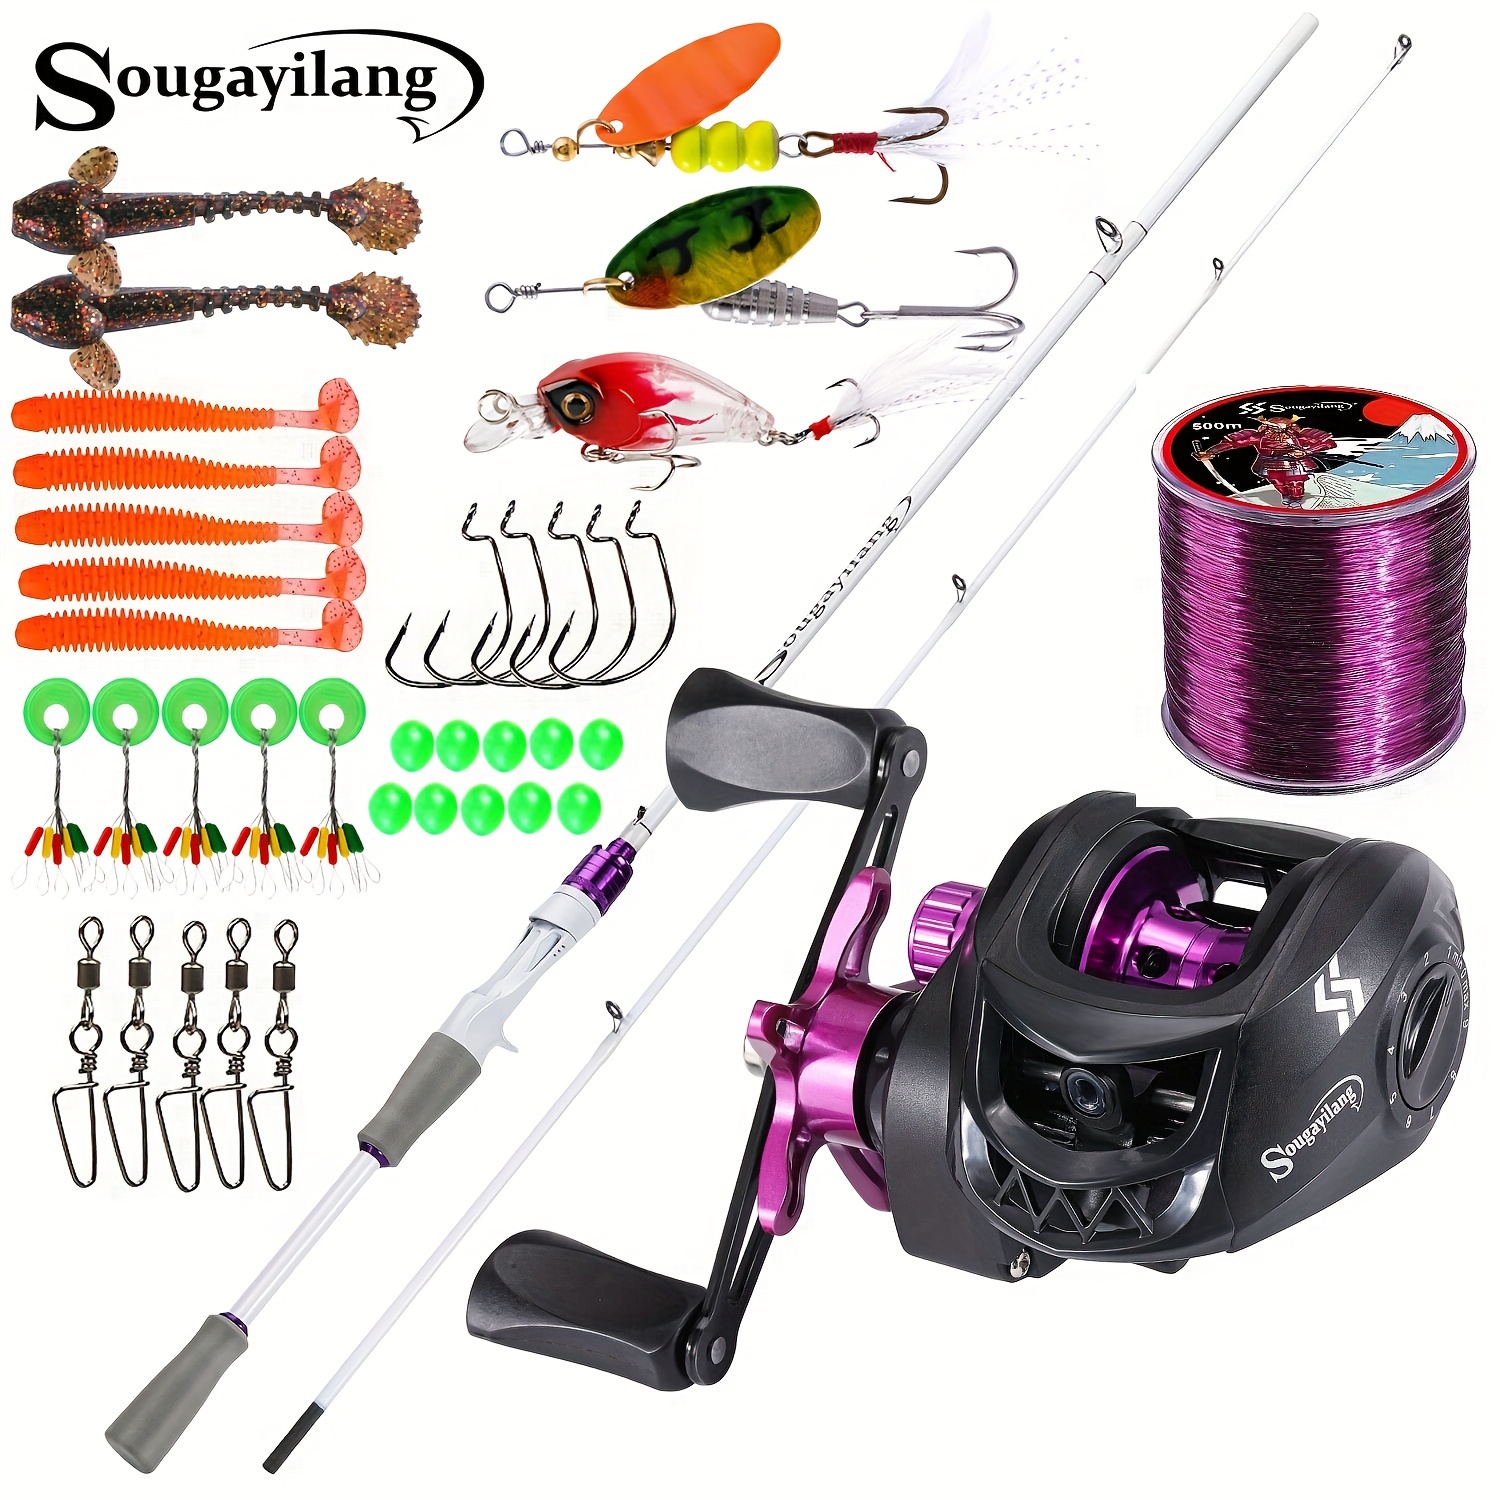 Sougayilang Spinning Casting Fishing Rod 1.8/2.1m Rod 4 Sections